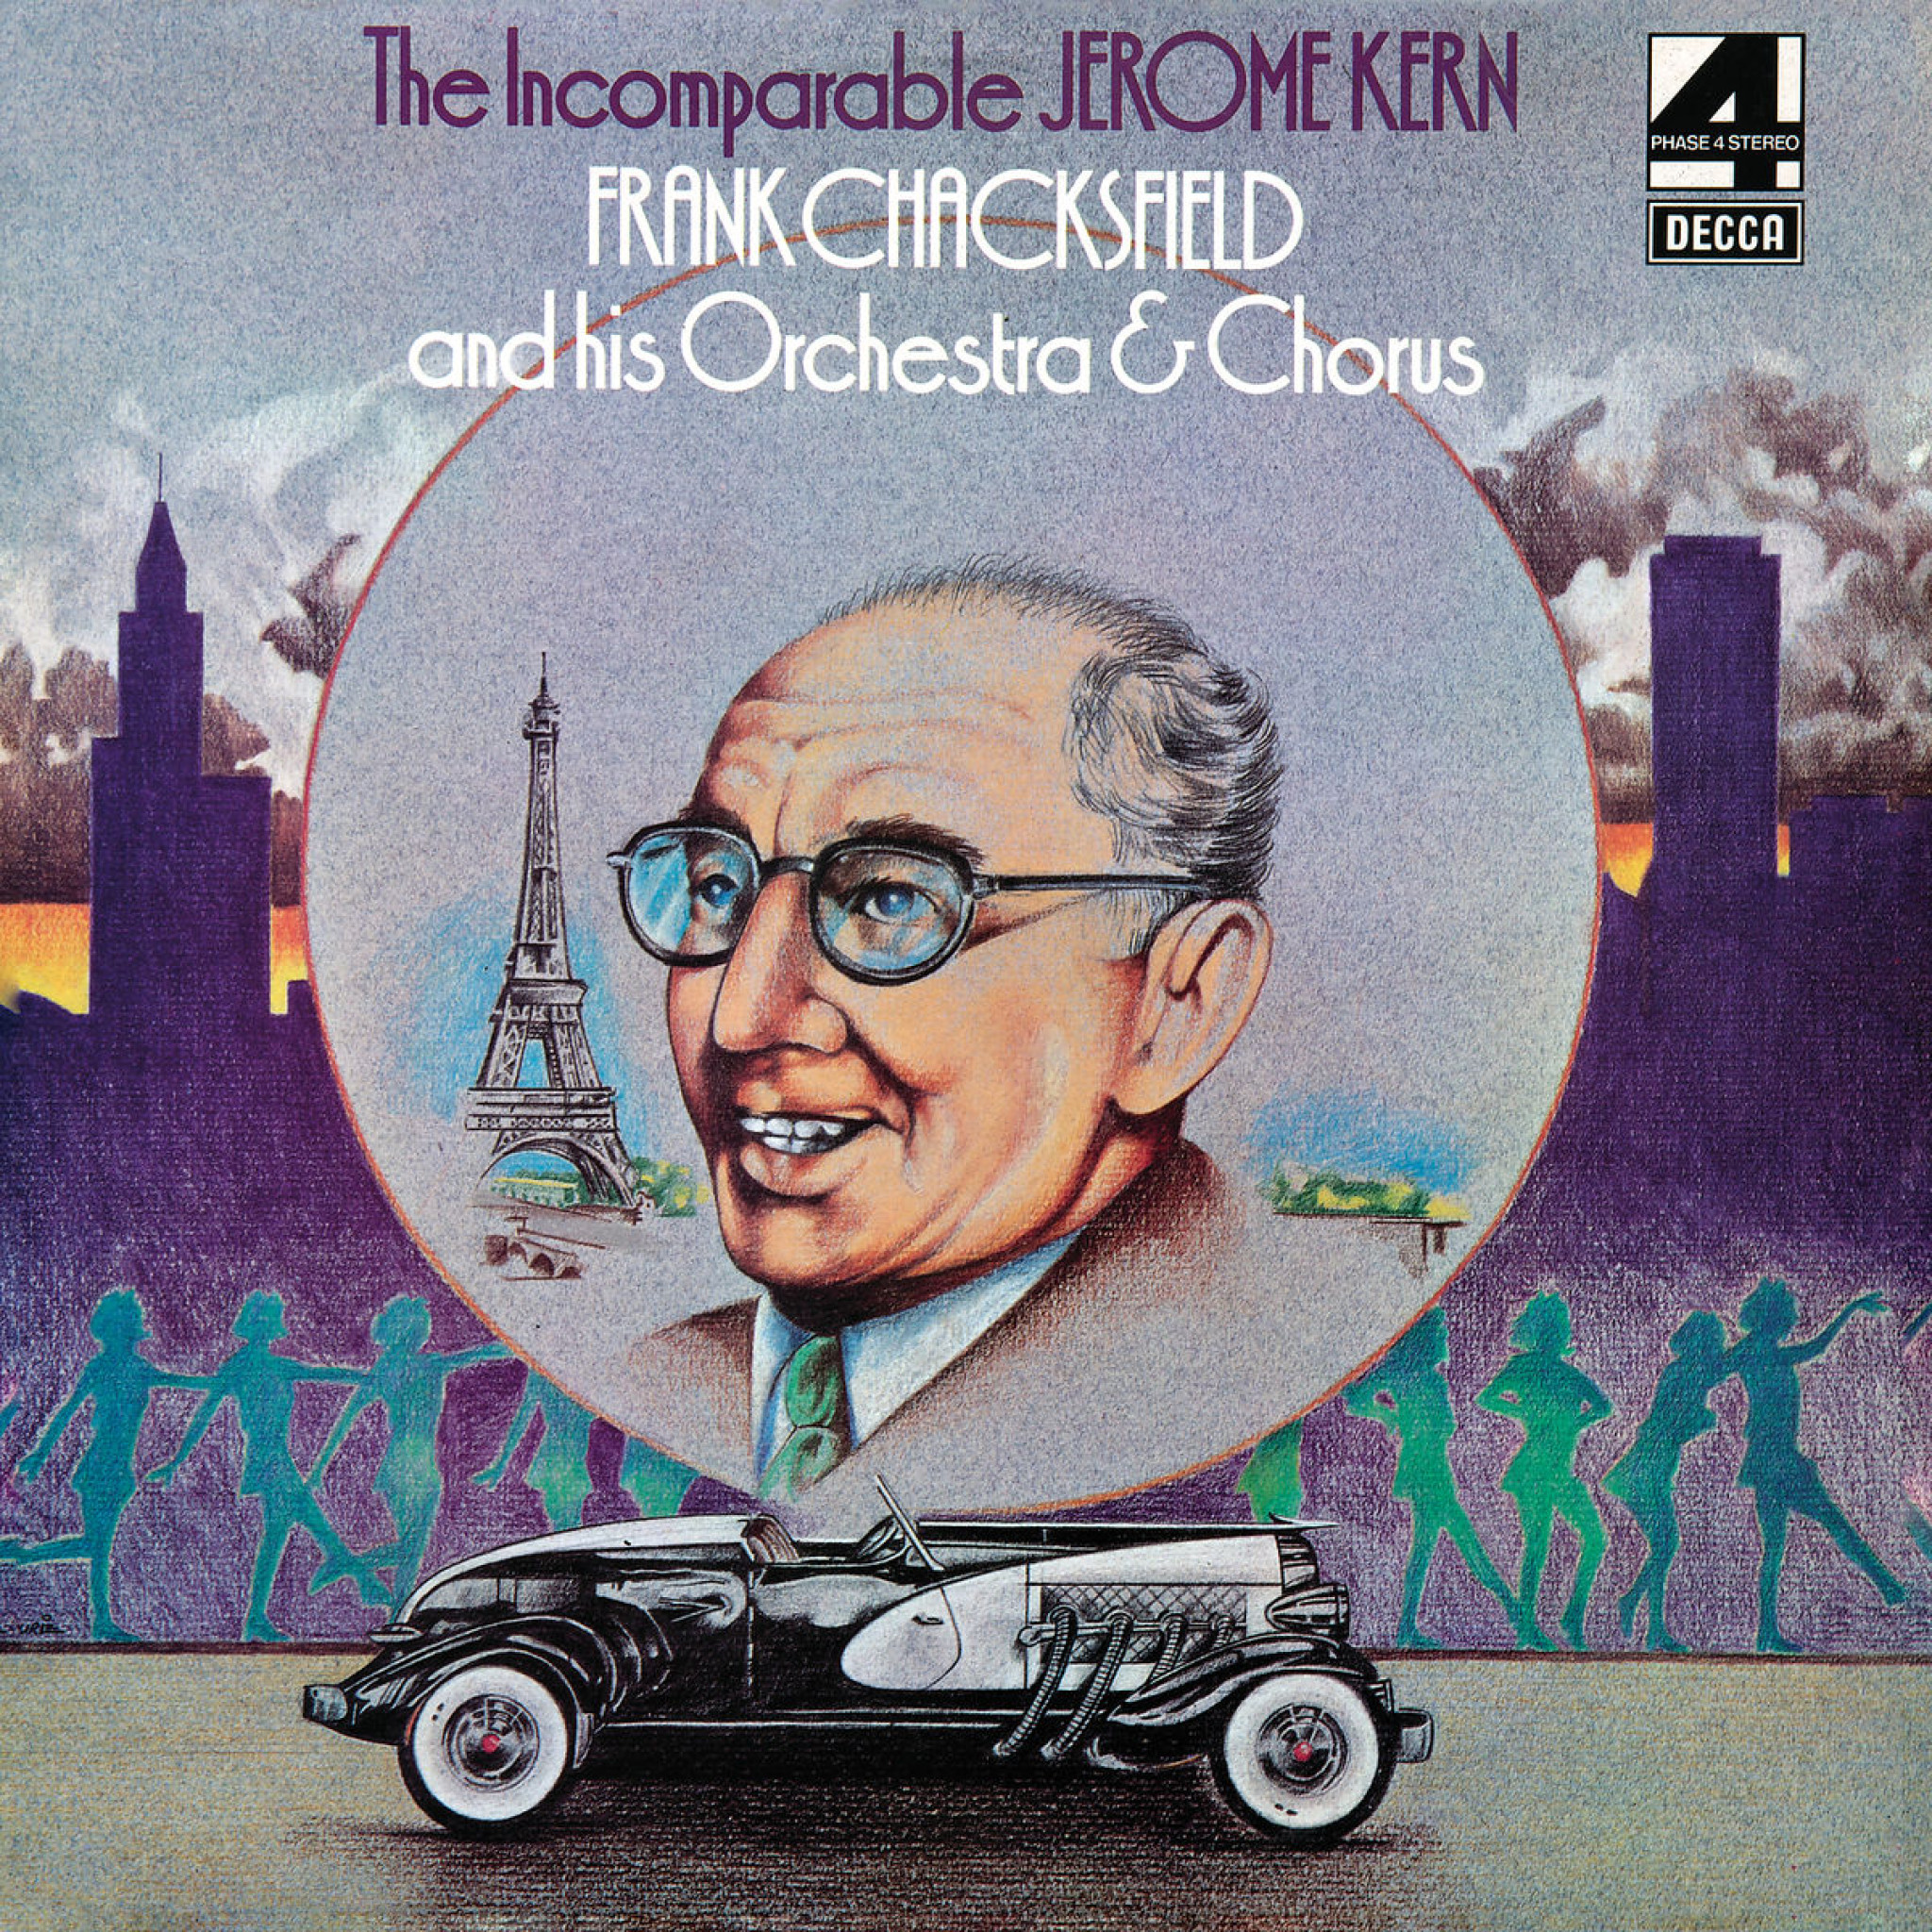 THE INCOMPARABLE JEROME KERN